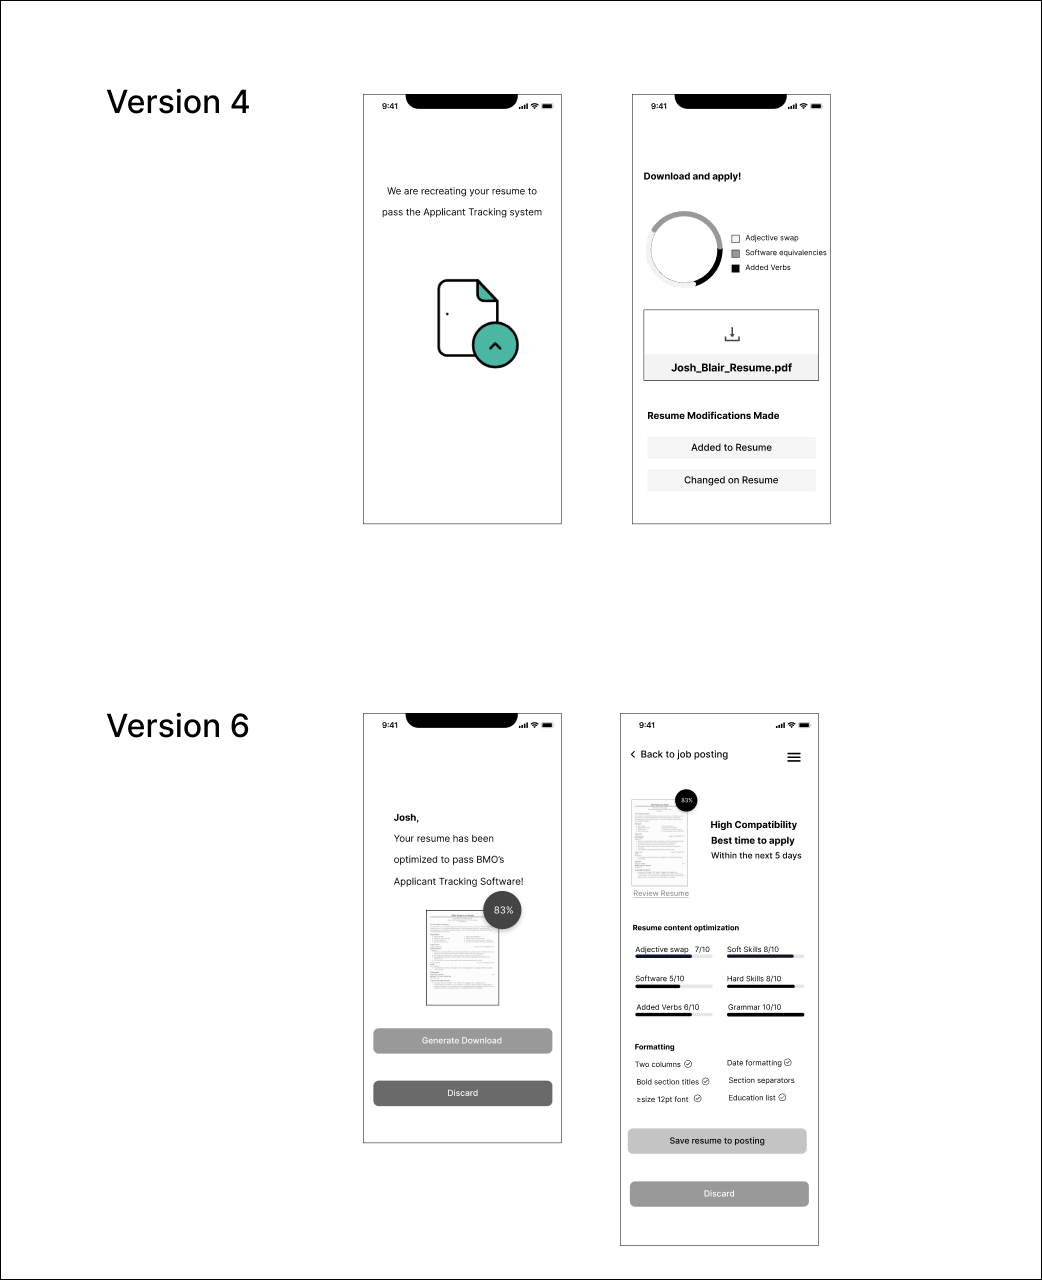 Iterations made from Version 4 to Version 4 based on usability testing.